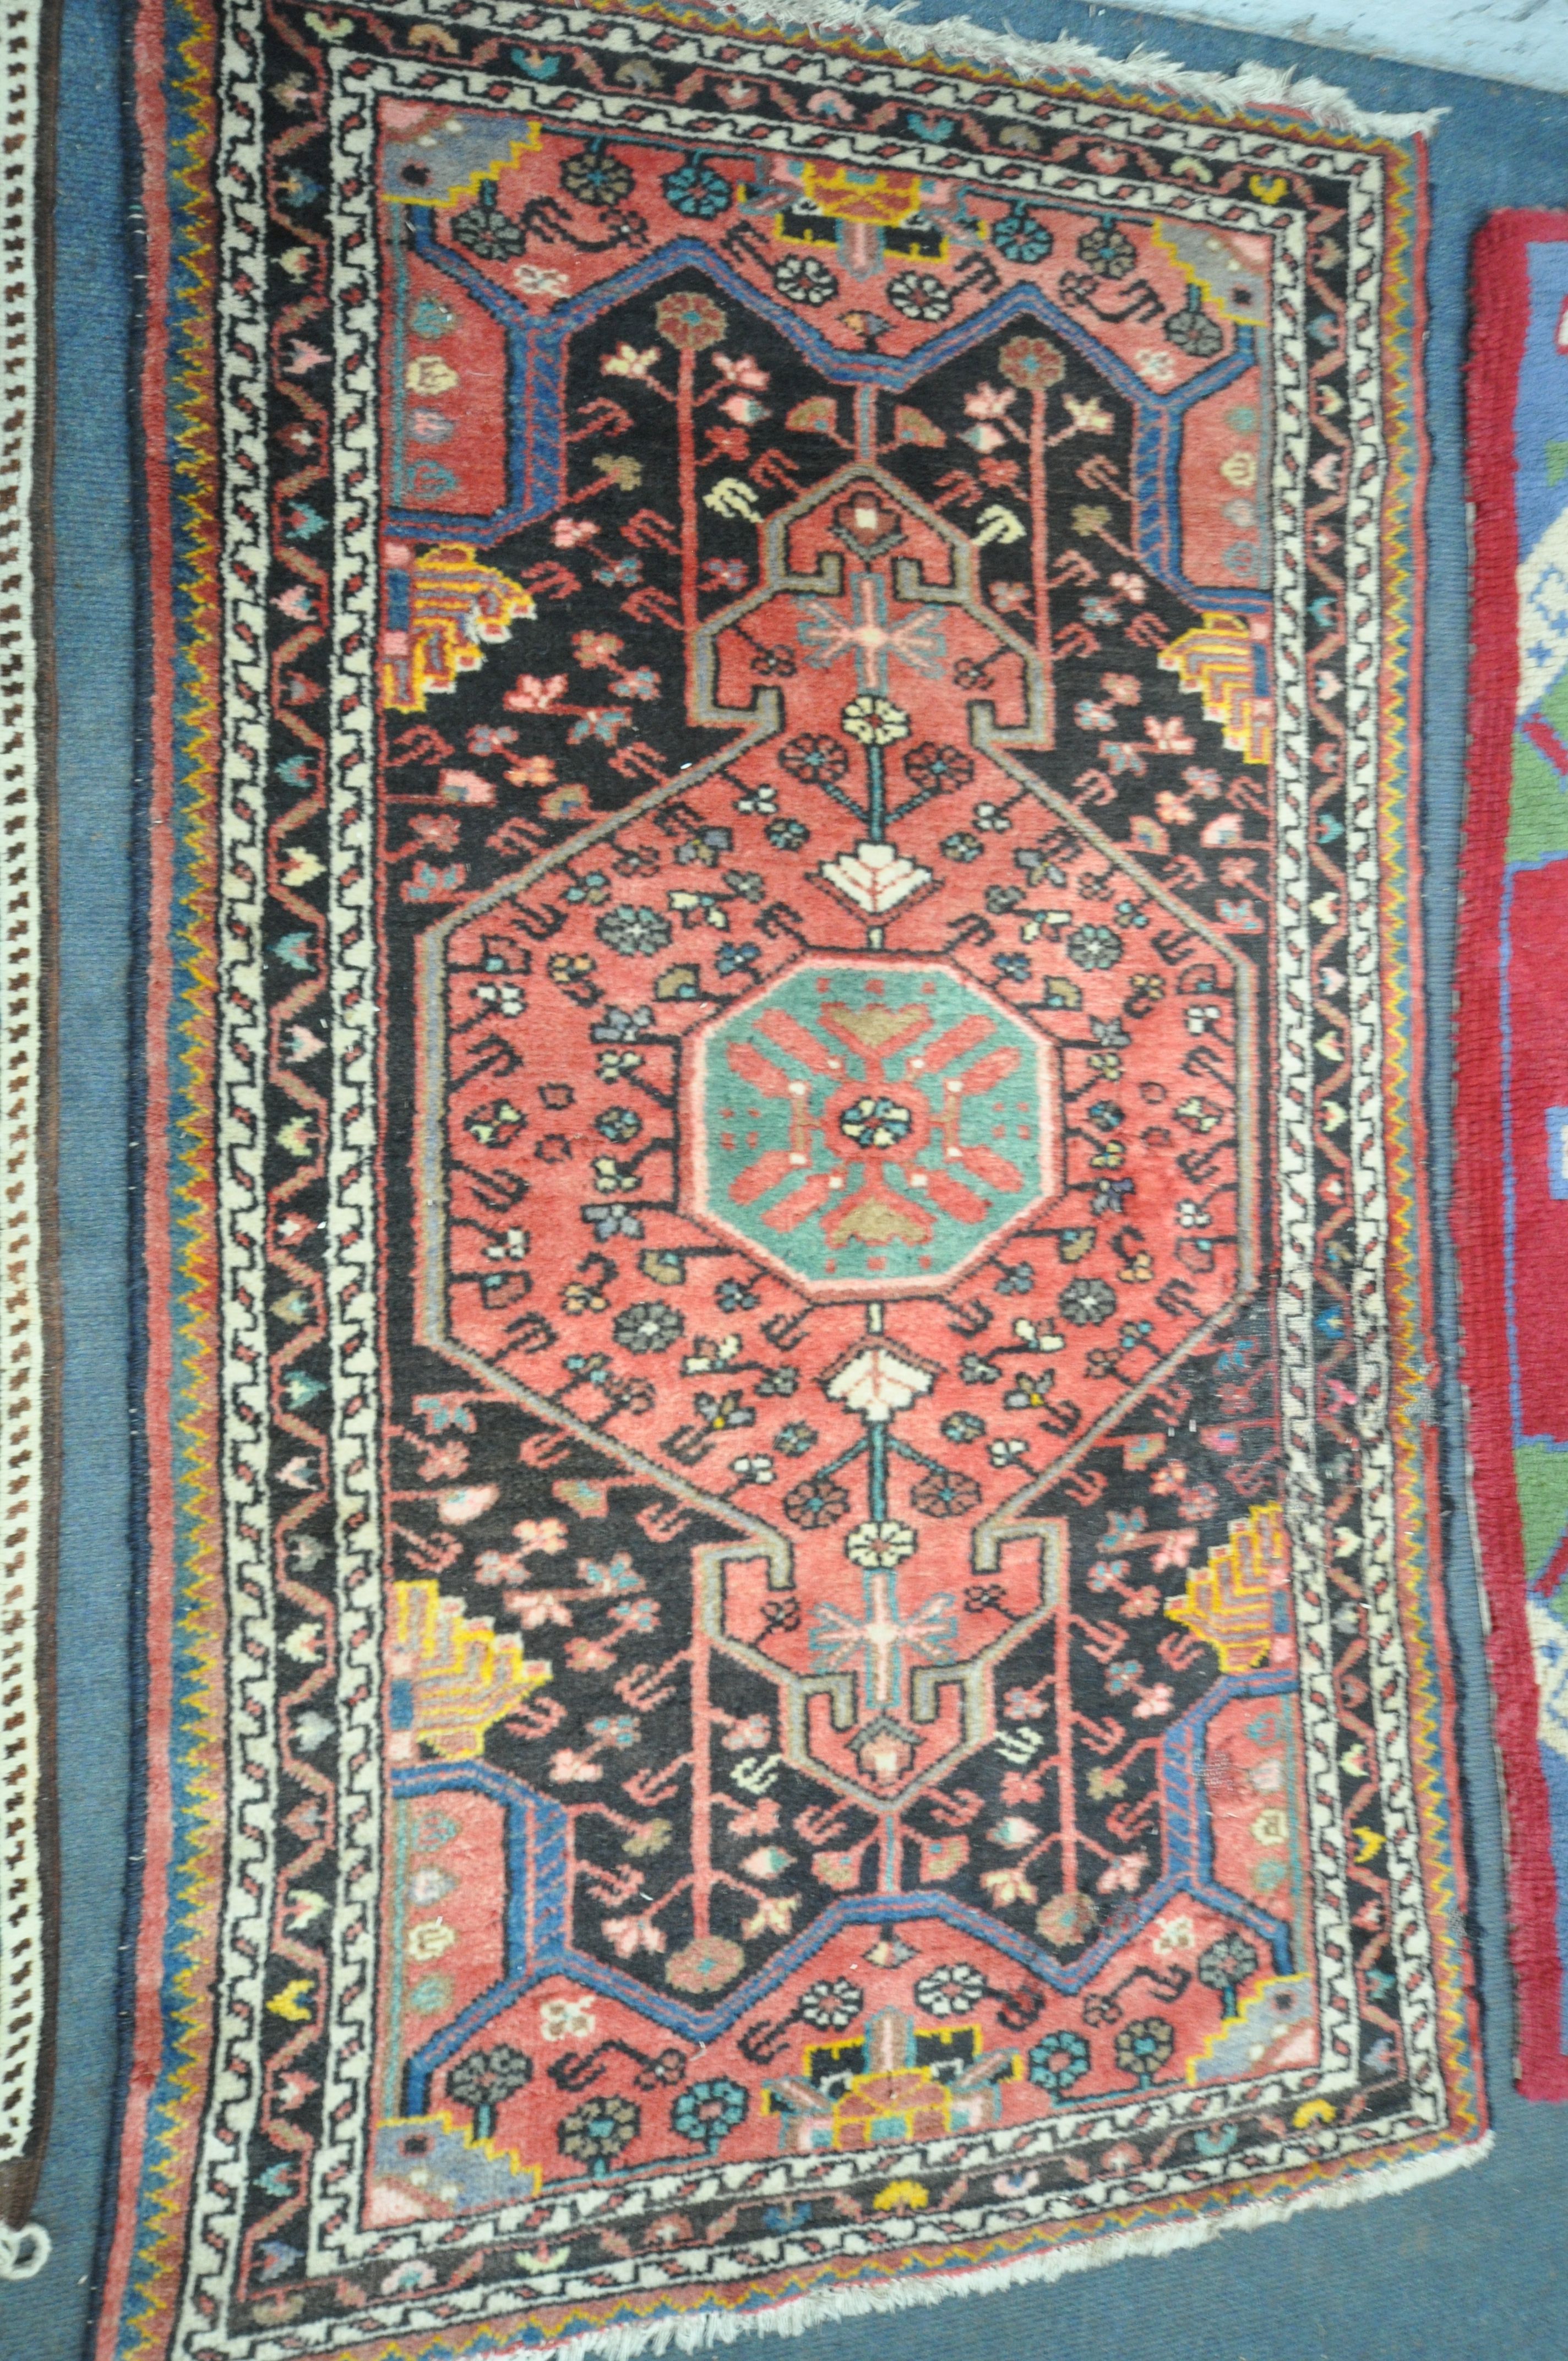 TWO WOOL PERSIAN RUGS, both of similar patterns, largest rug measurements, 155cm x 97cm, along - Image 3 of 6